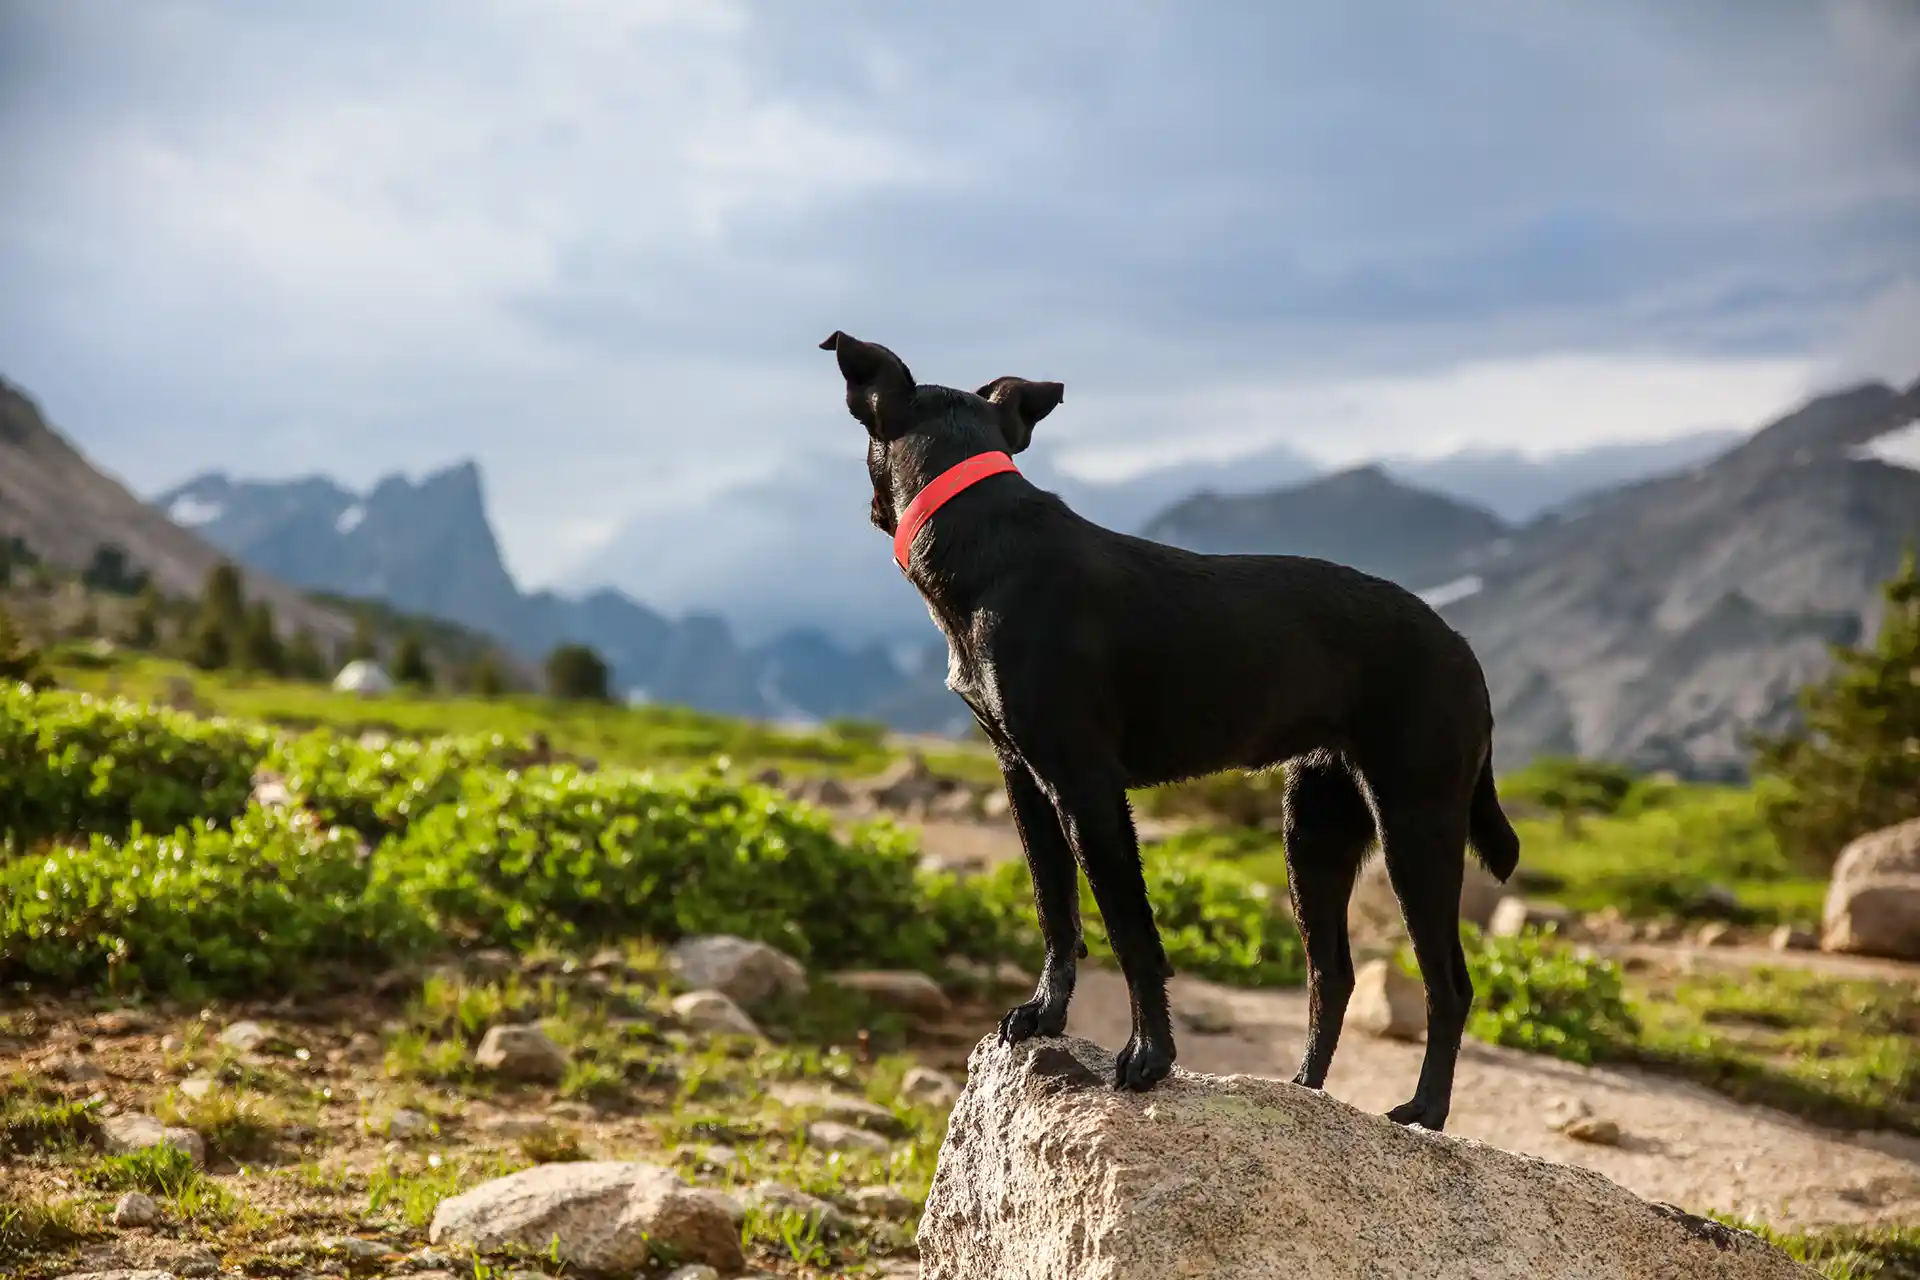 Dog standing on a rocky hill